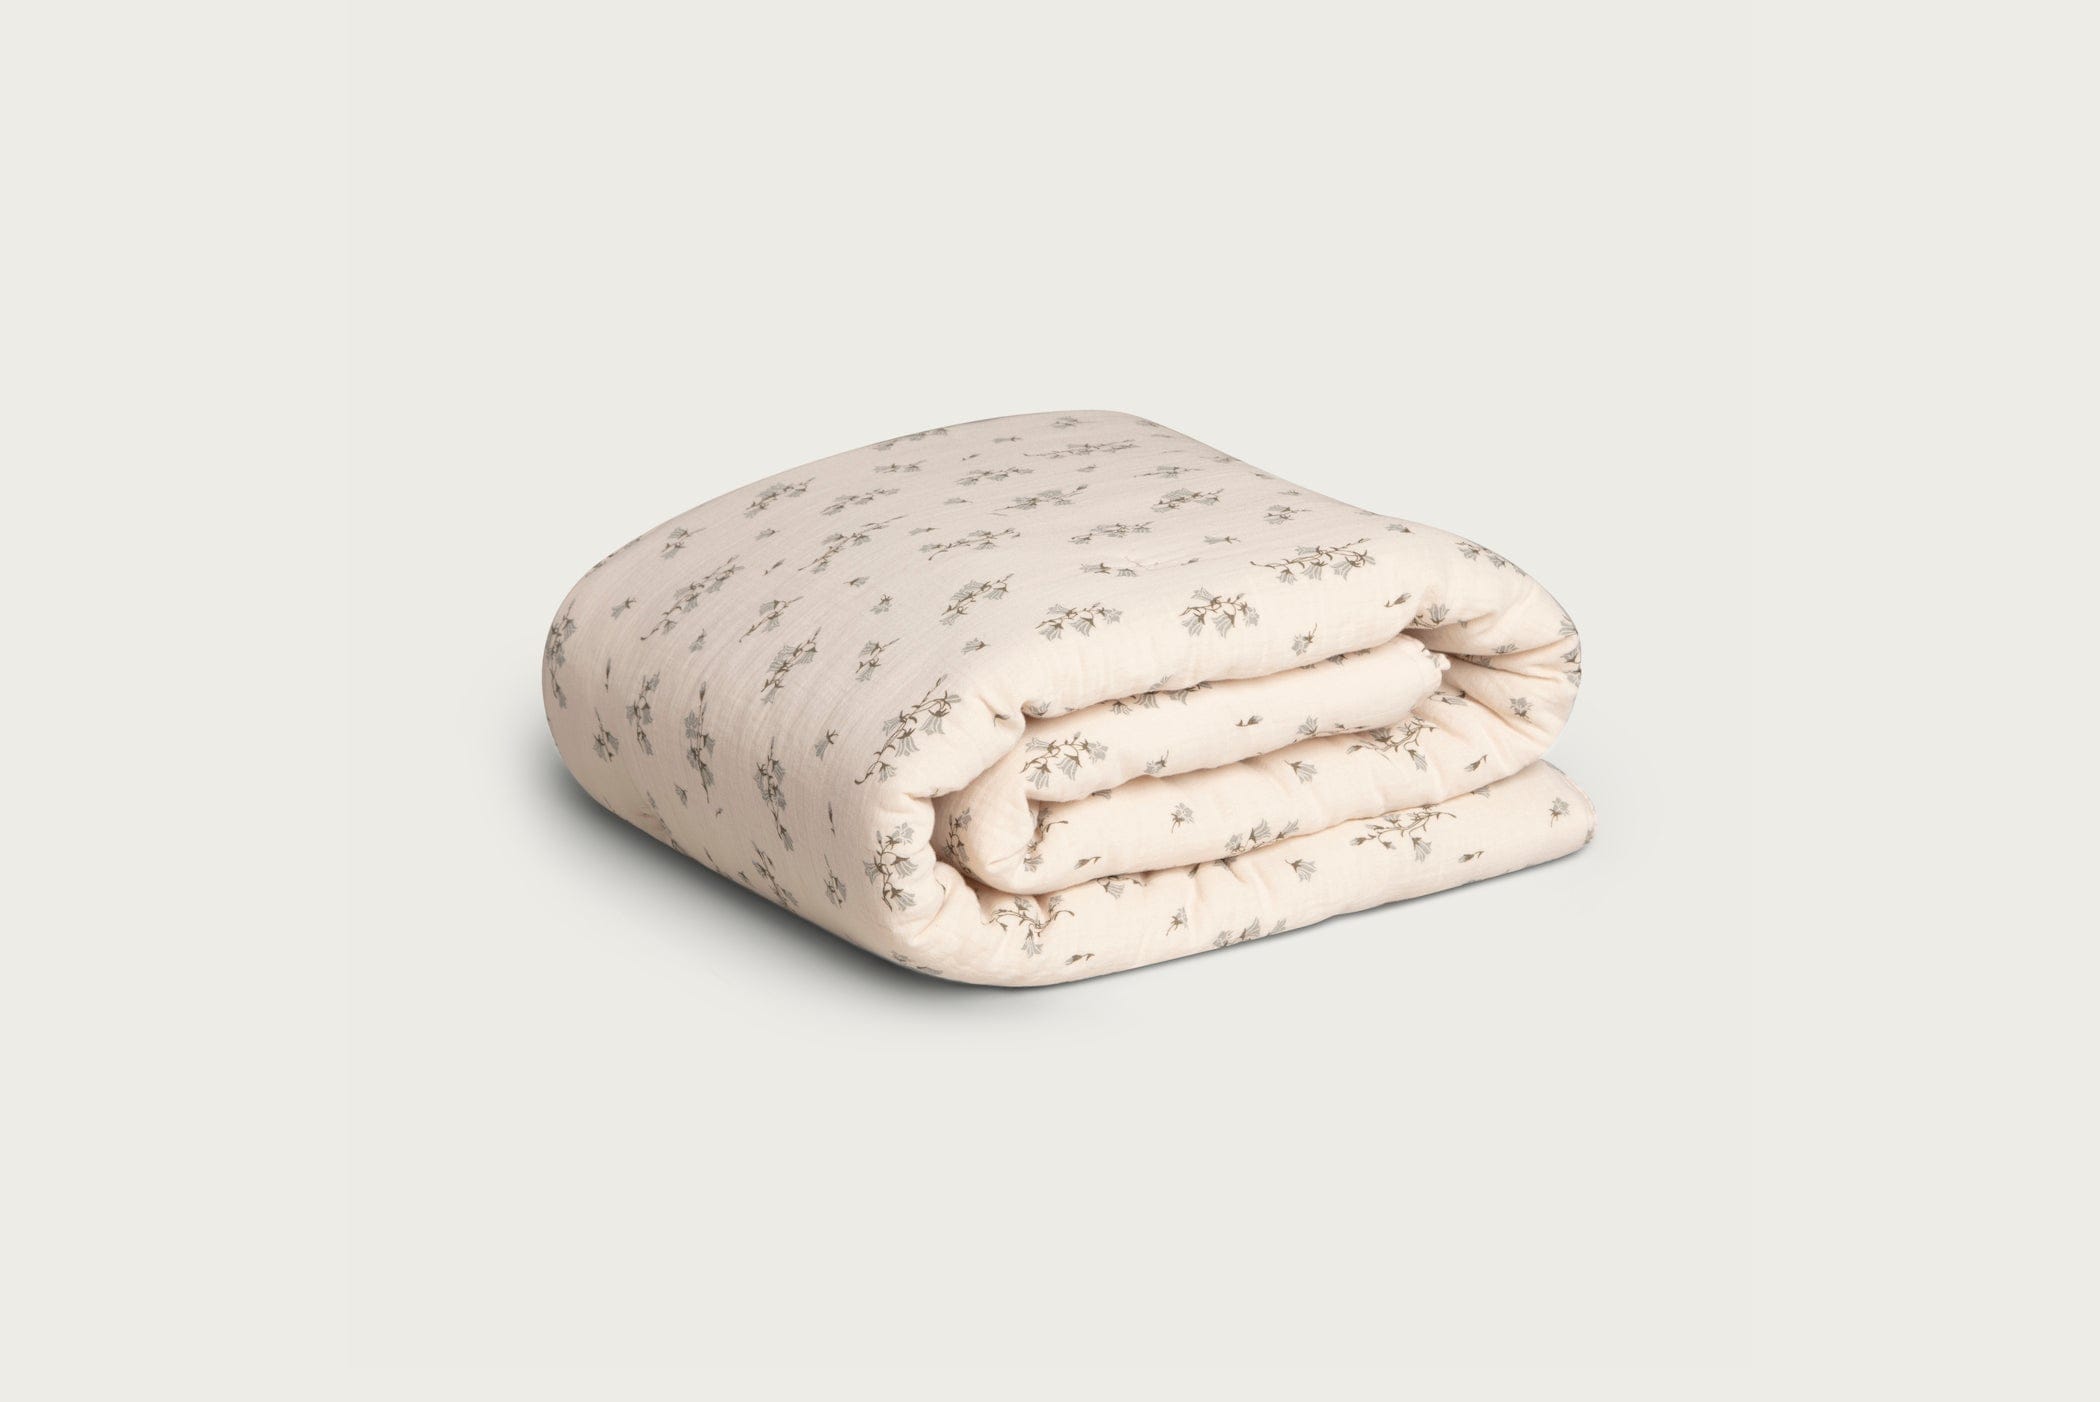 Soft cream colored filled cotton muslin blanket, with bellflower print